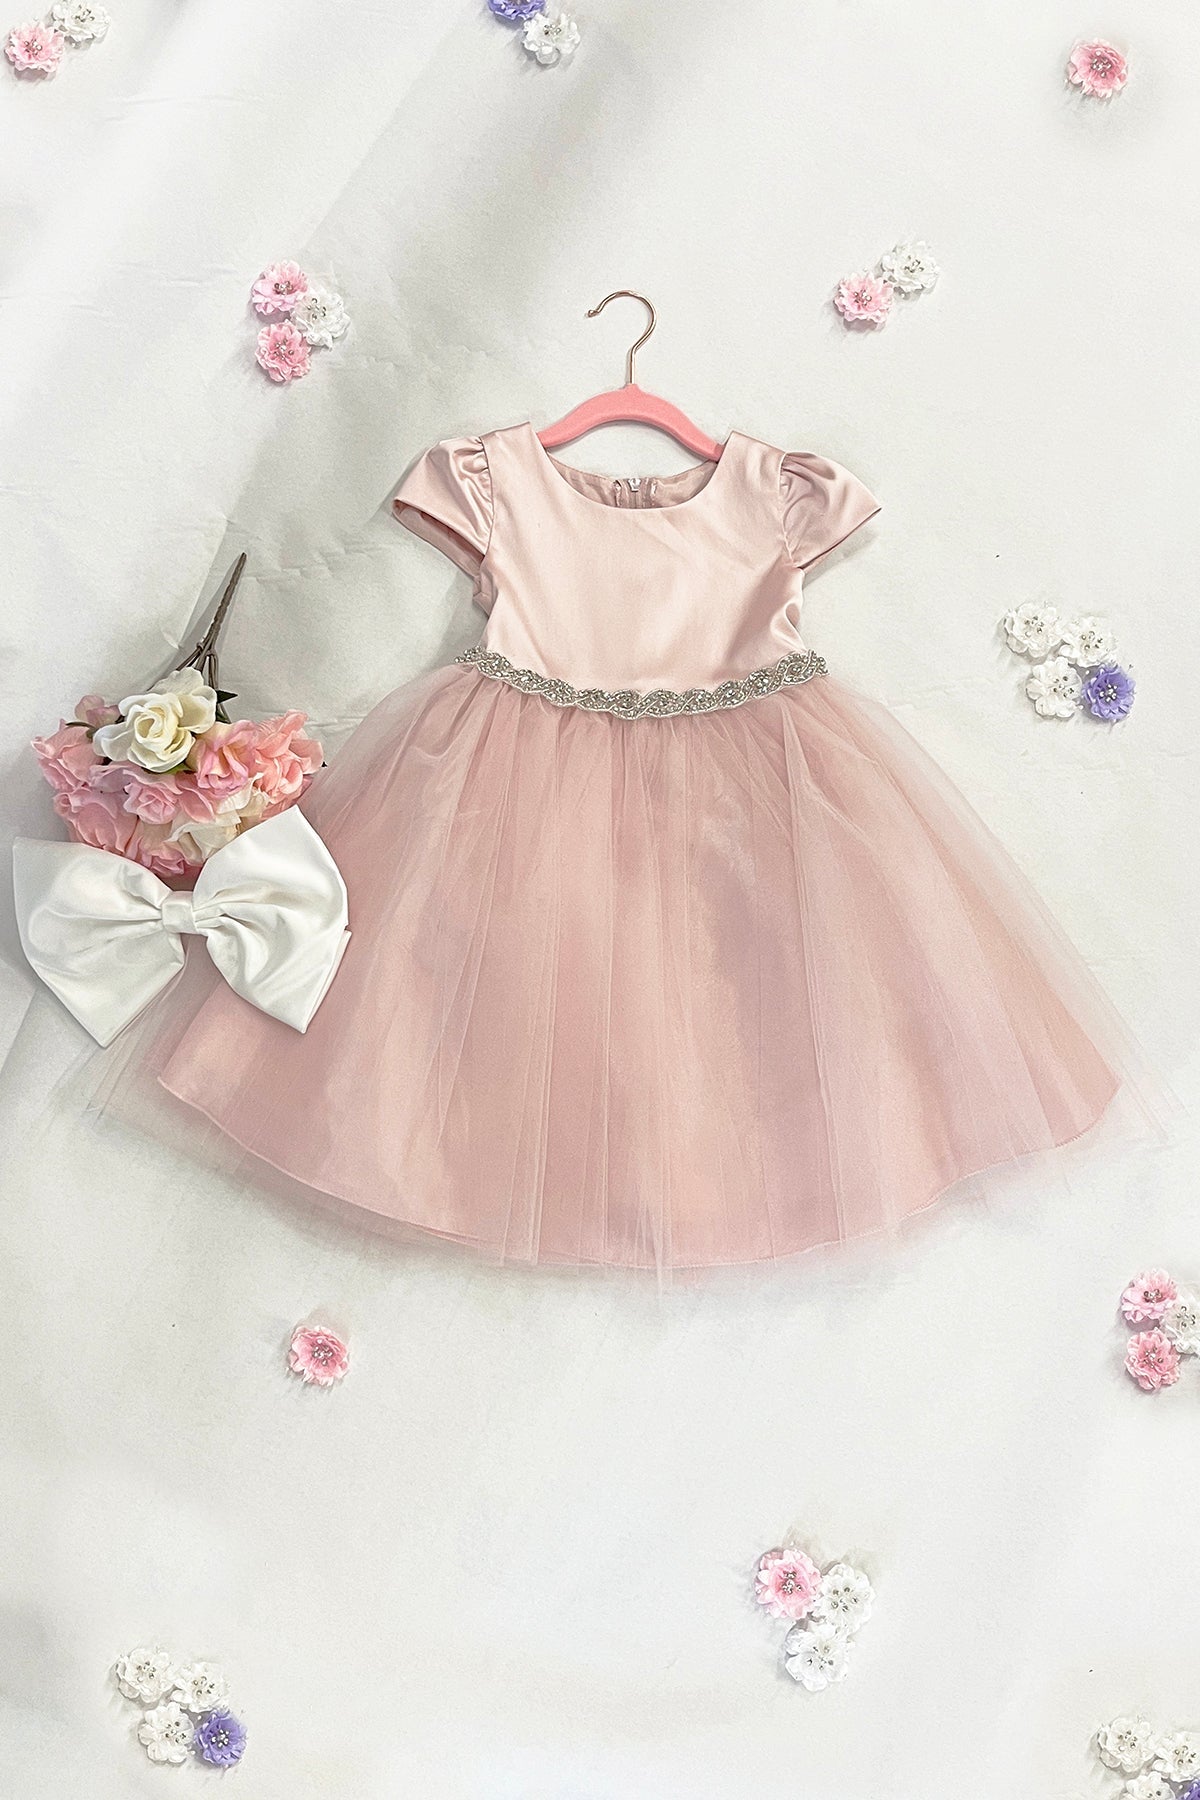 Dress - Capped Sleeve Satin & Tulle Girls Dress With Plus Sizes